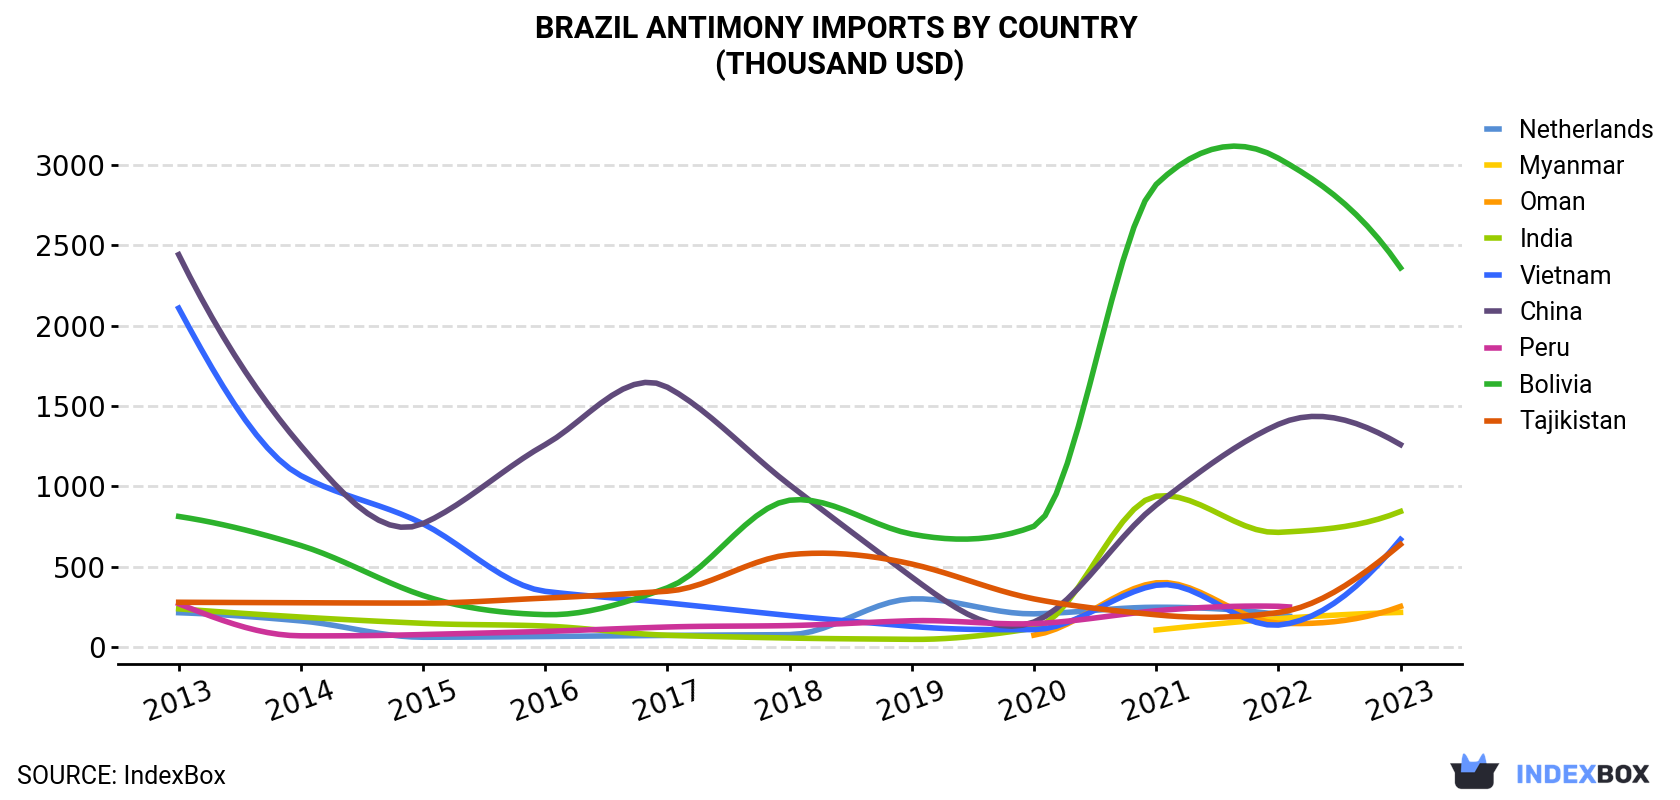 Brazil Antimony Imports By Country (Thousand USD)